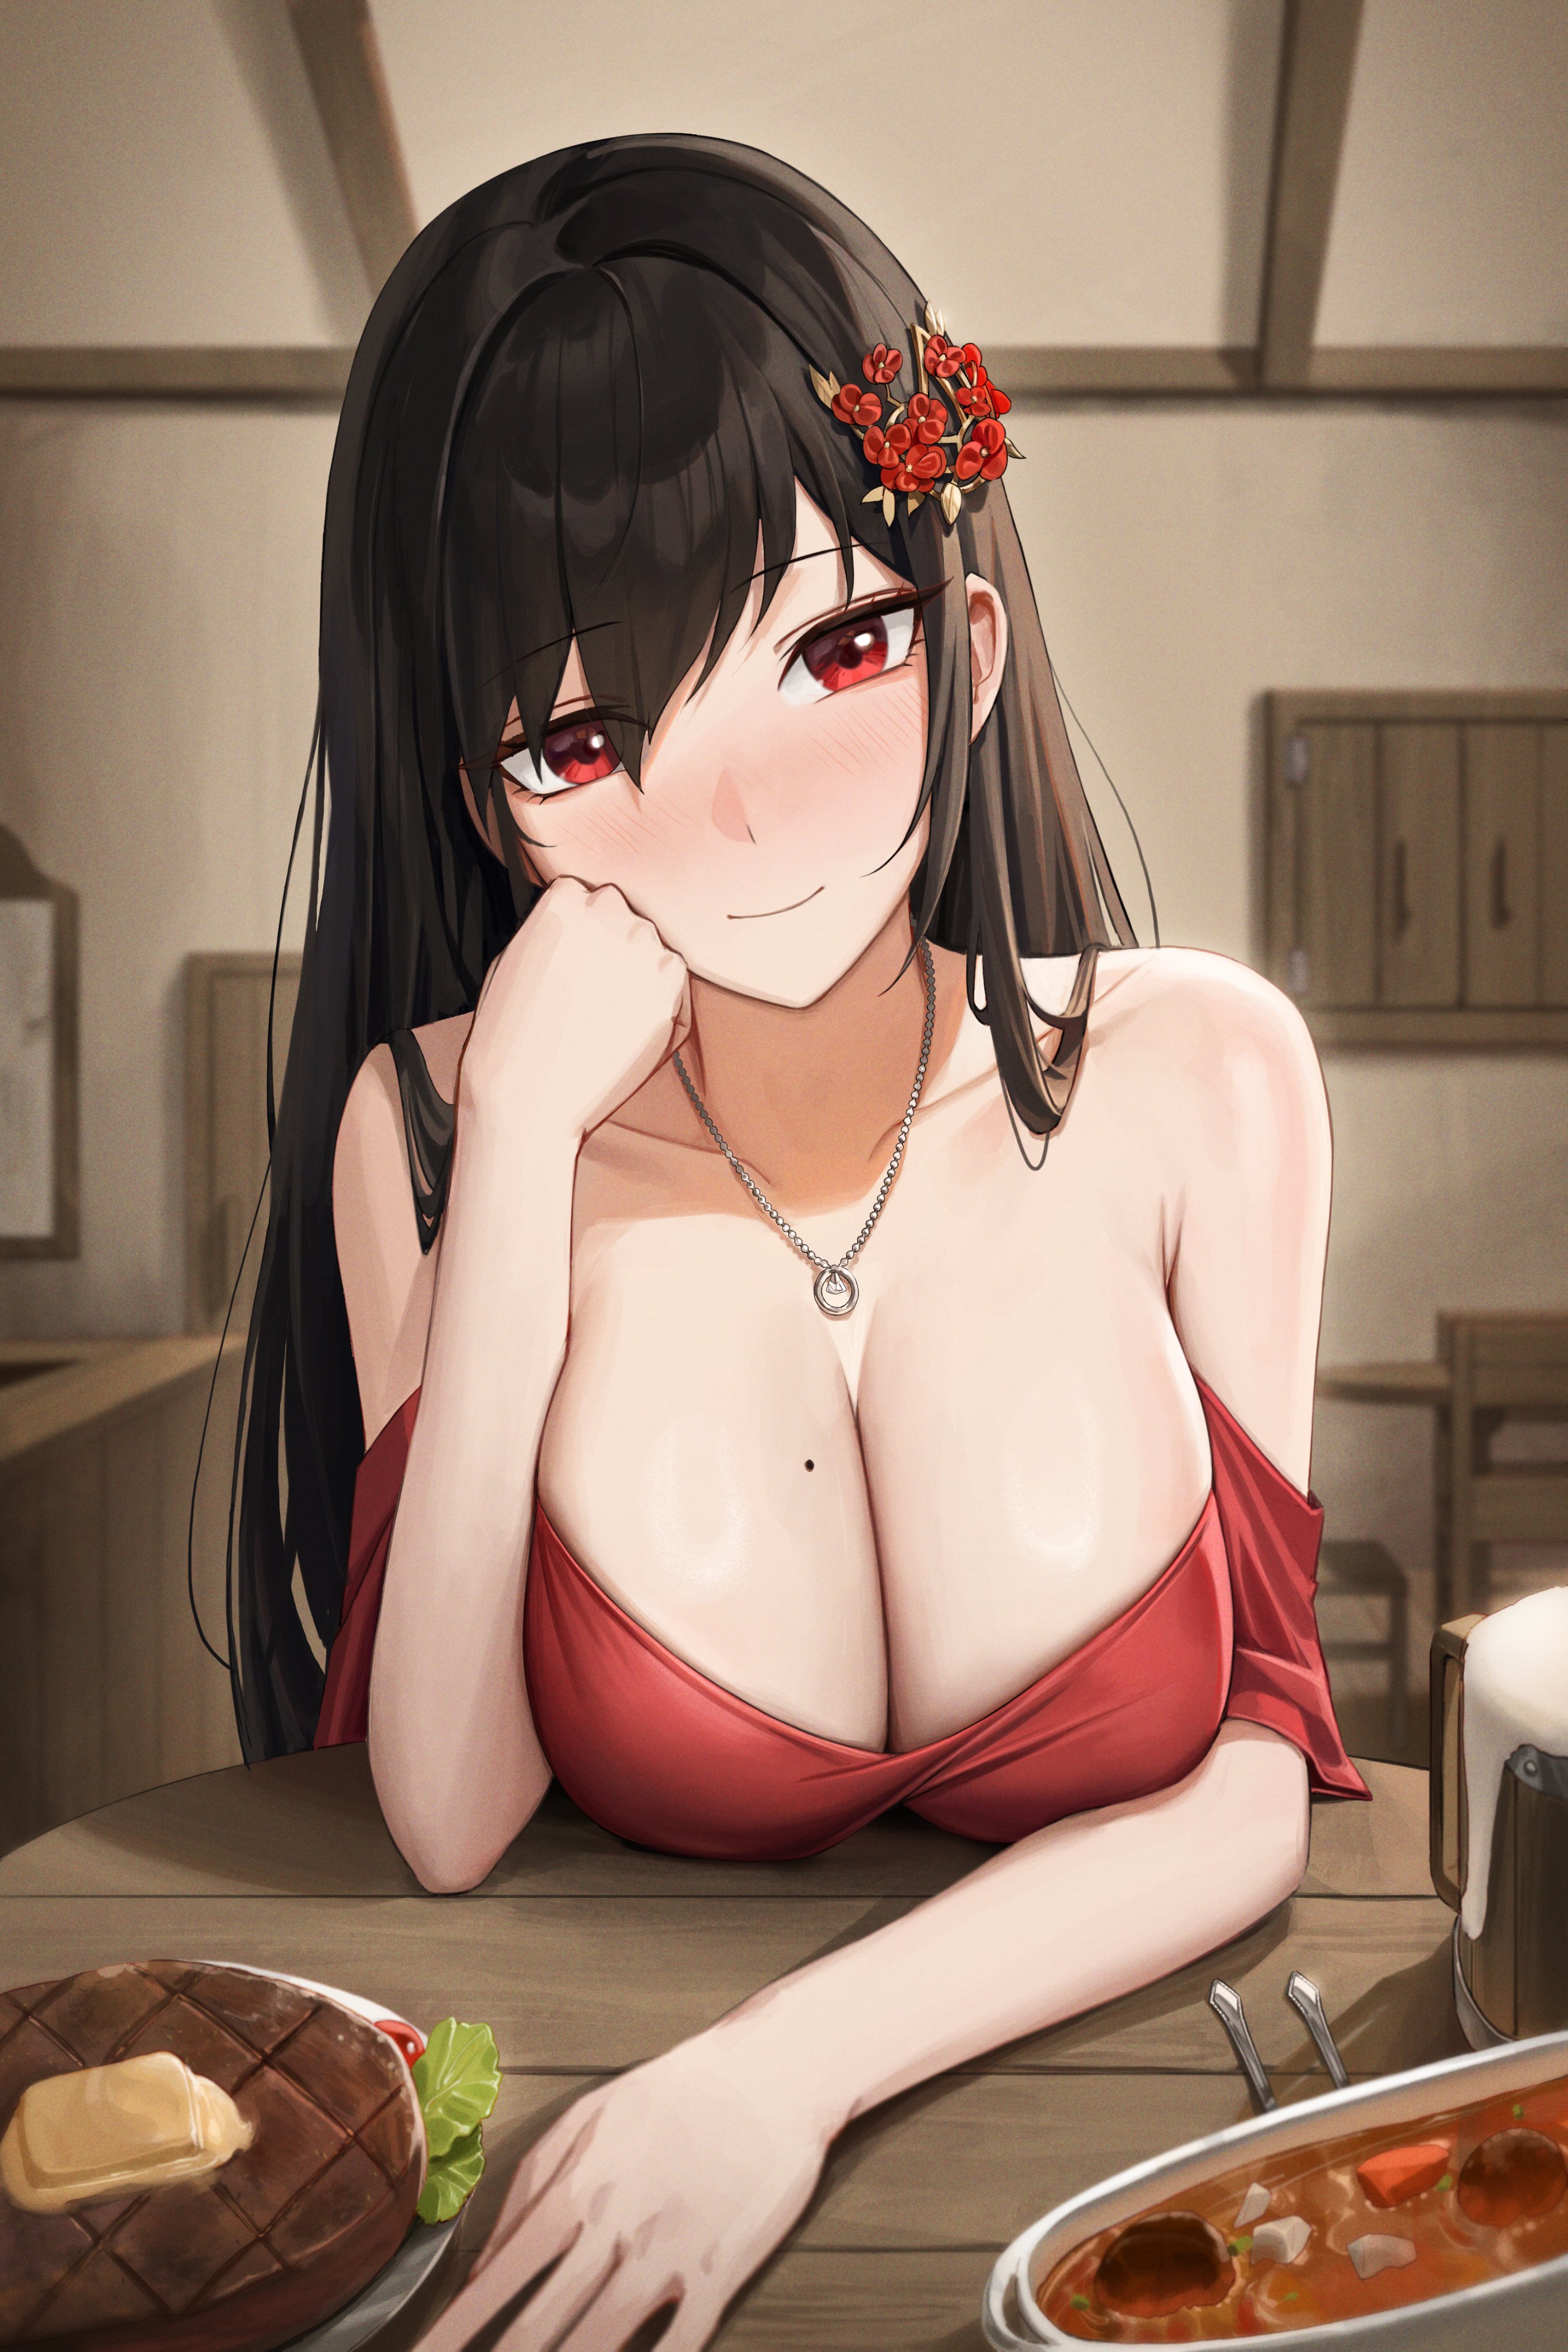 Anime 2731x4096 anime anime girls big boobs cleavage food red eyes moles brunette red dress low neckline blushing bare shoulders artwork CryTurtle